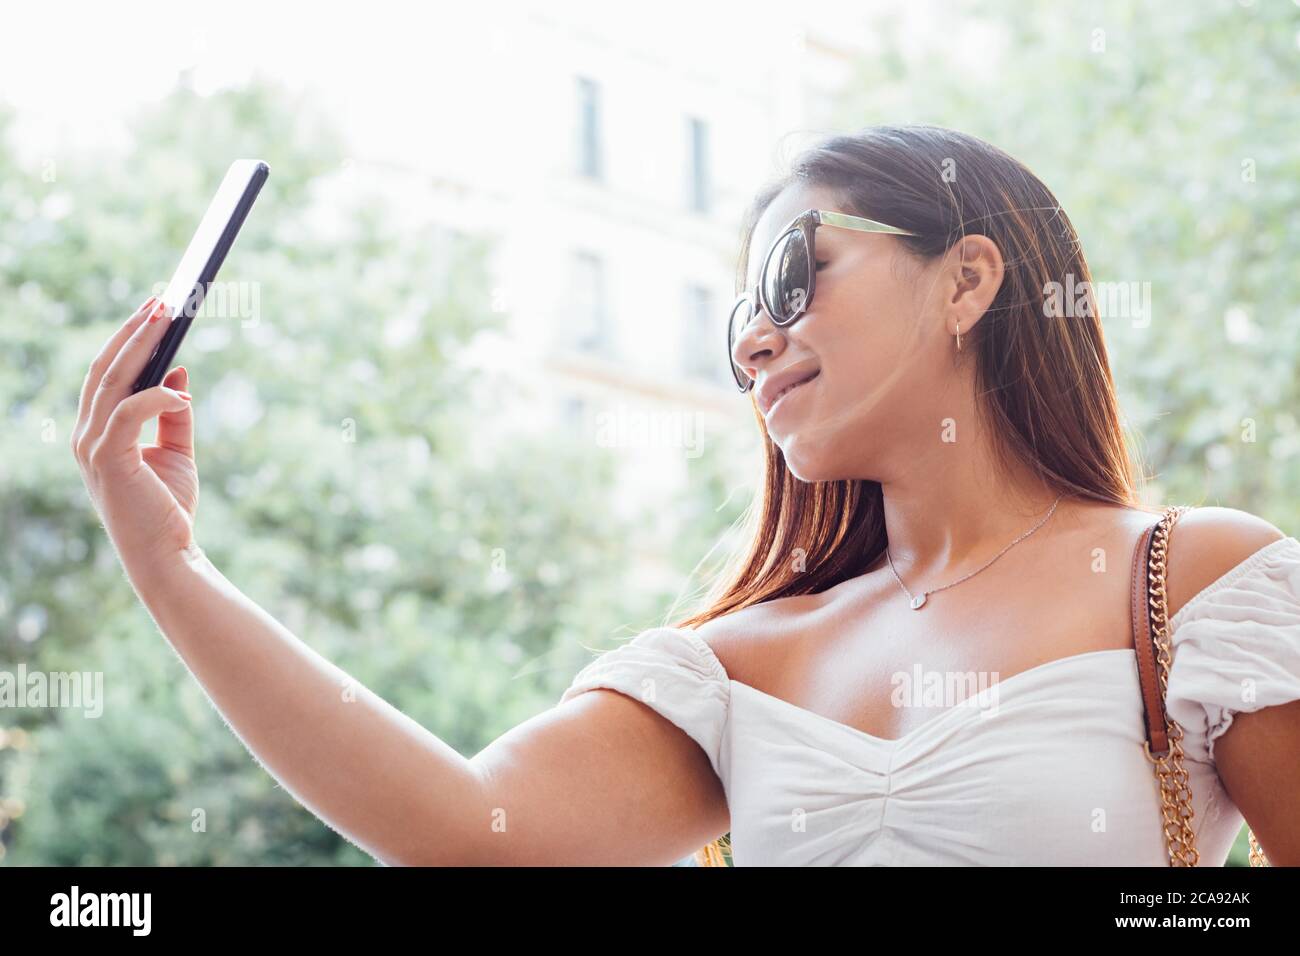 woman taking a selfie with her smartphone Stock Photo